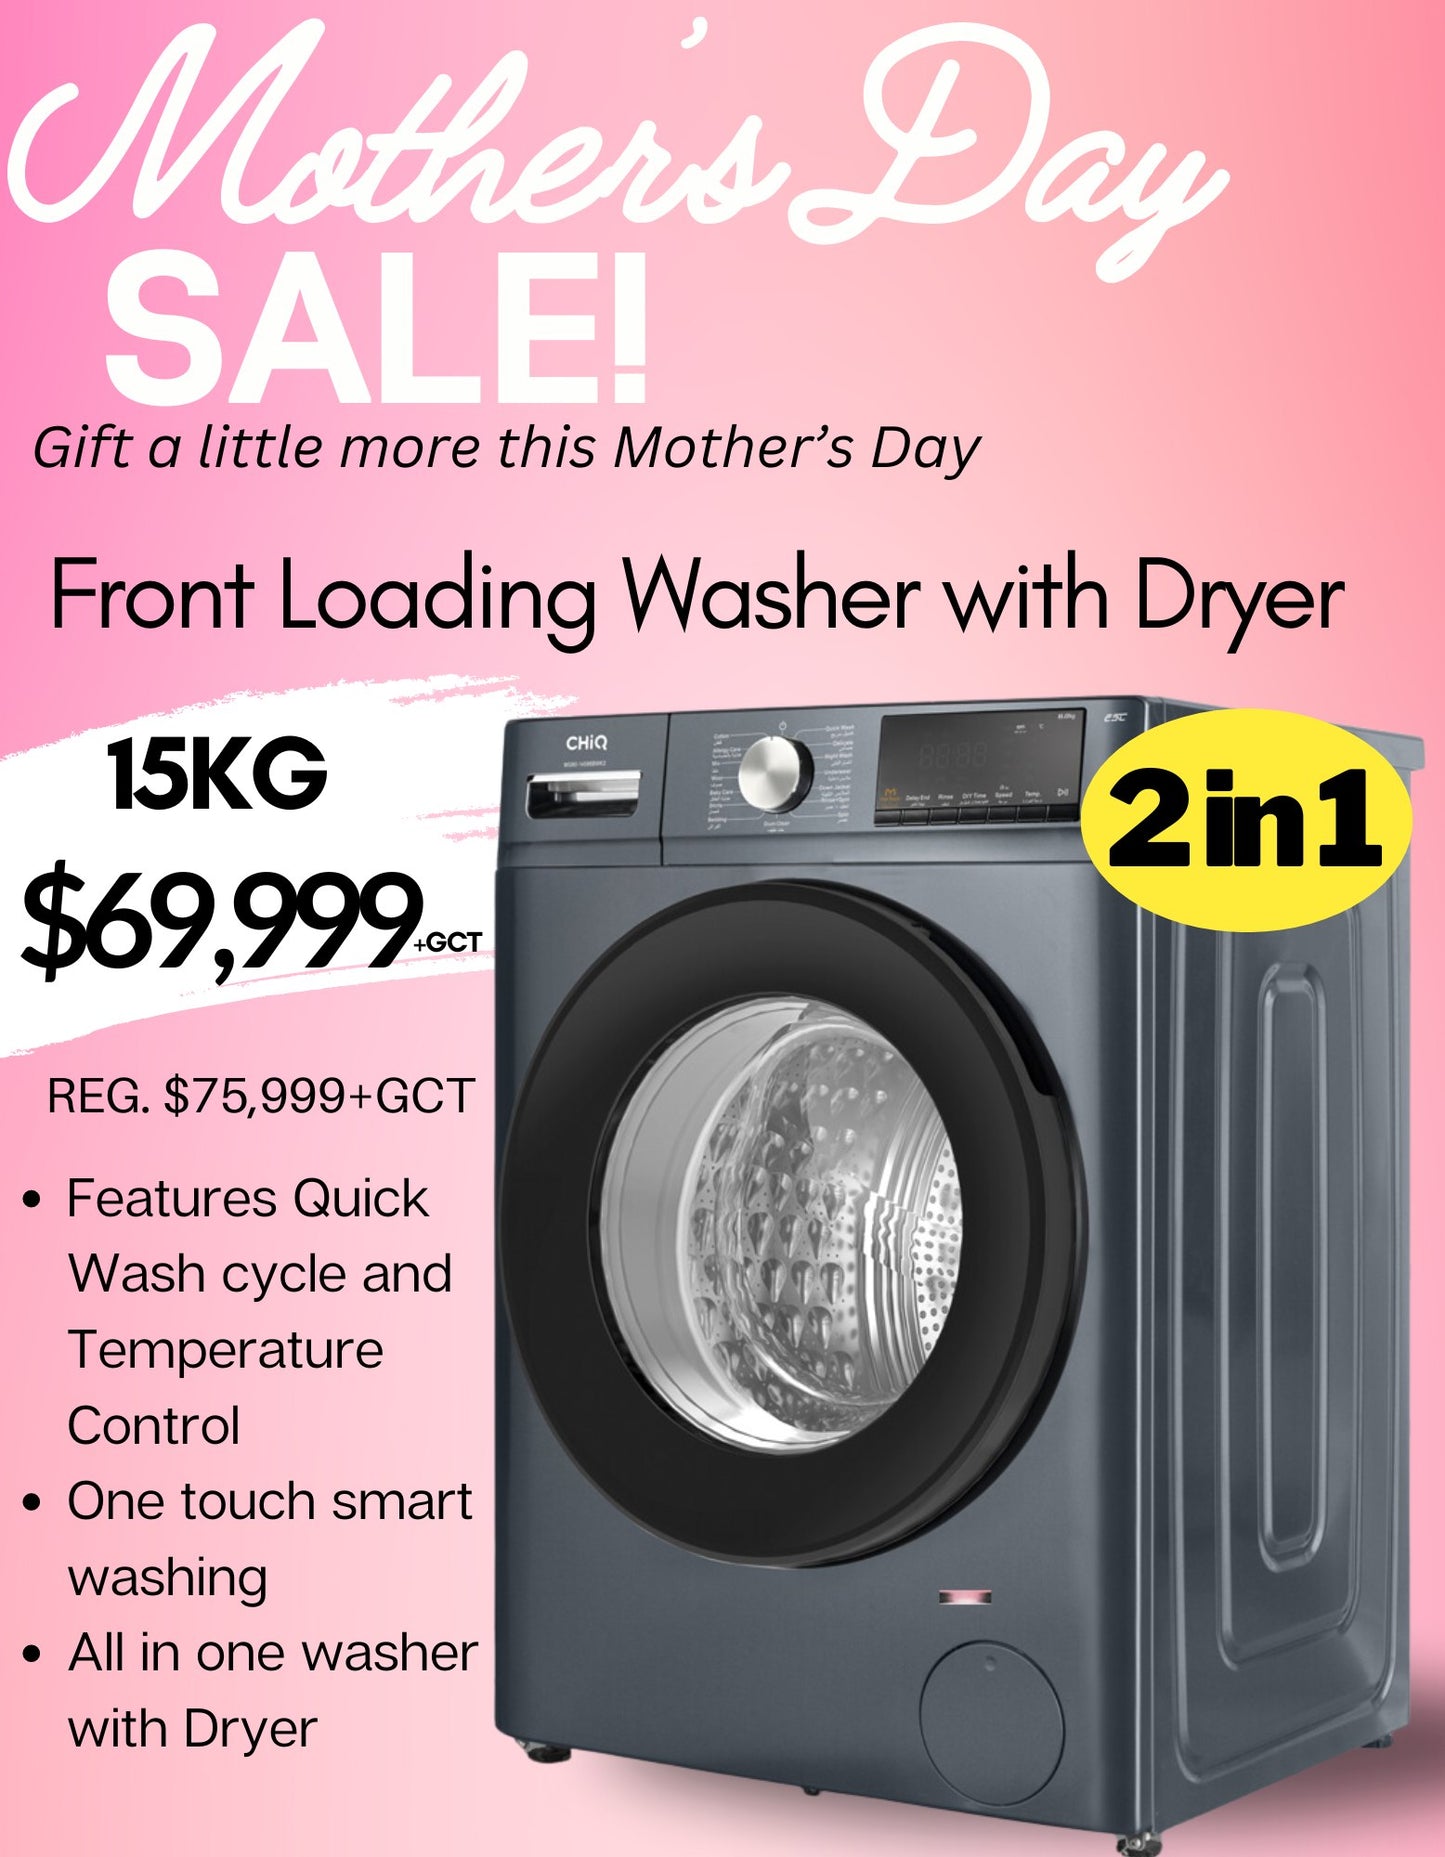 Imperial 15KG Washer and Dryer all-in-one